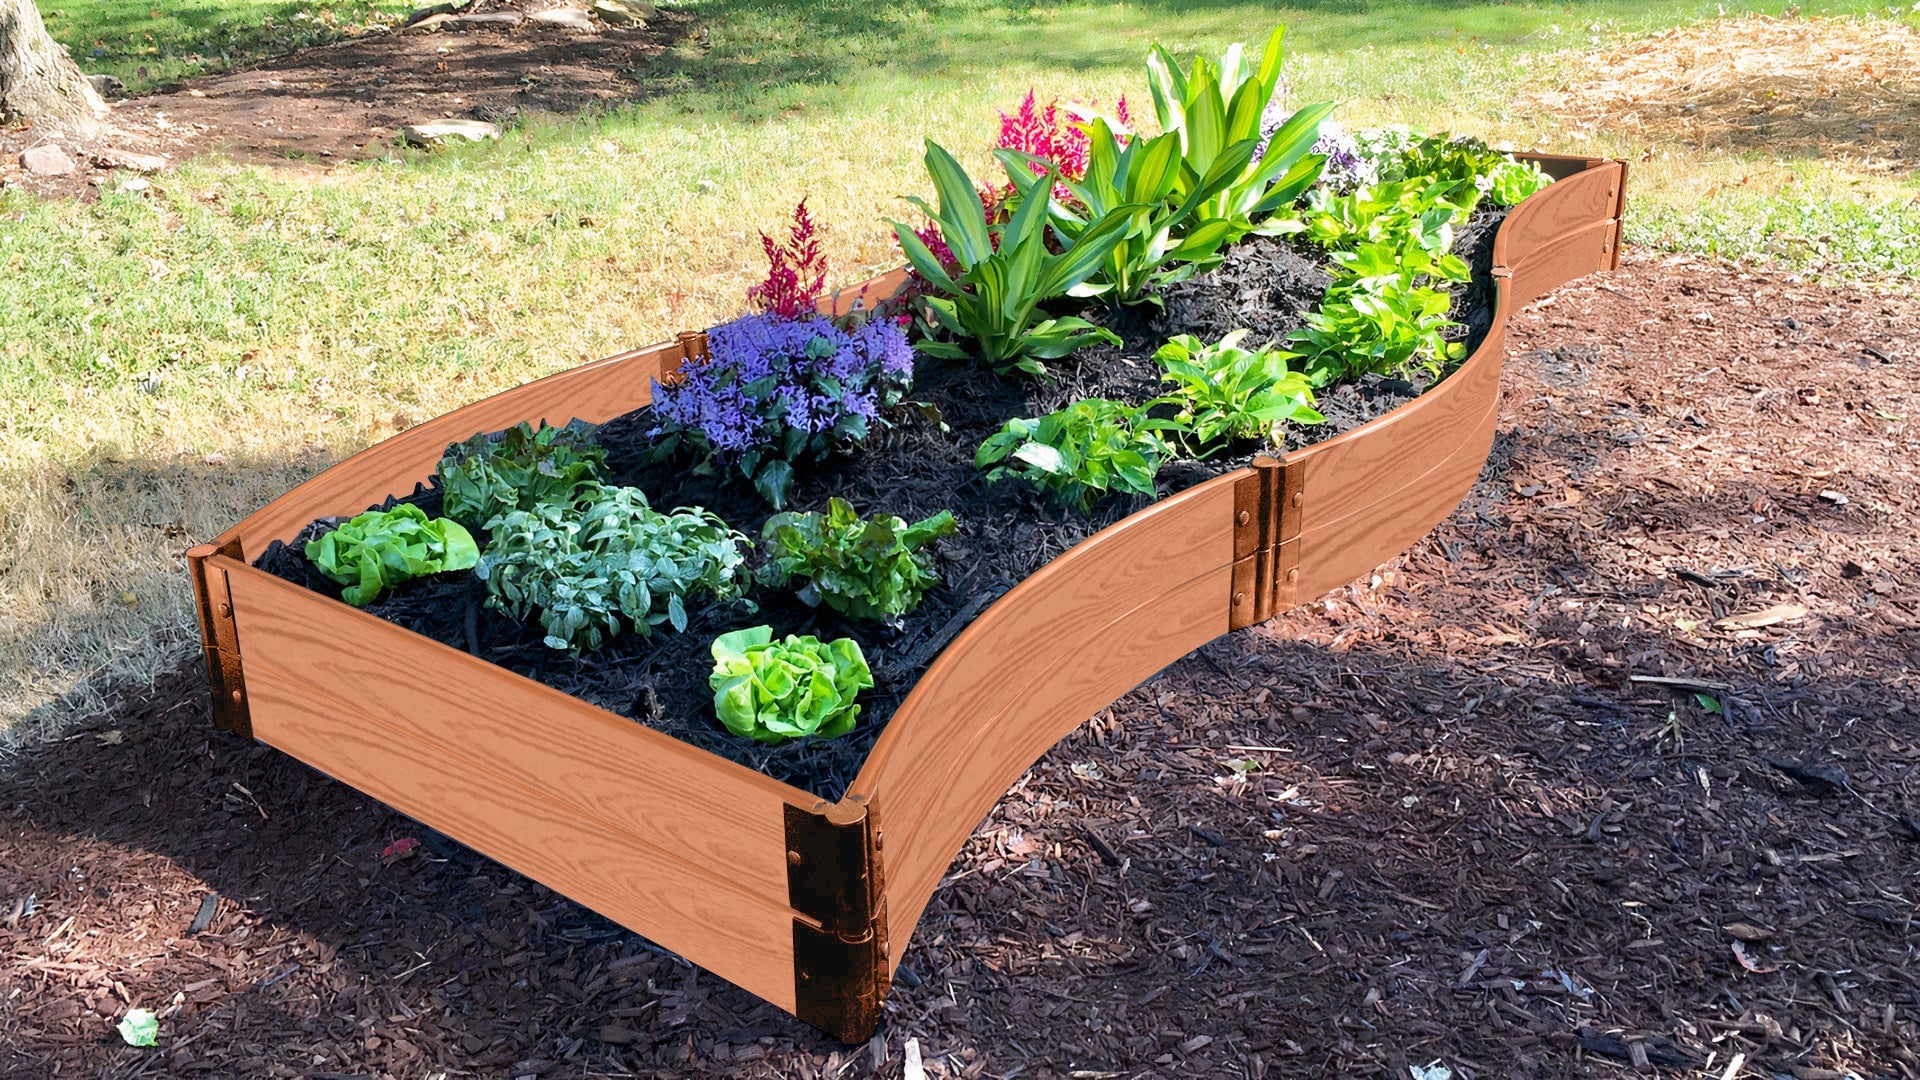 'Lazy Curve' - 4' x 12' Raised Garden Bed Raised Garden Beds Frame It All Classic Sienna 1" 2 = 11"